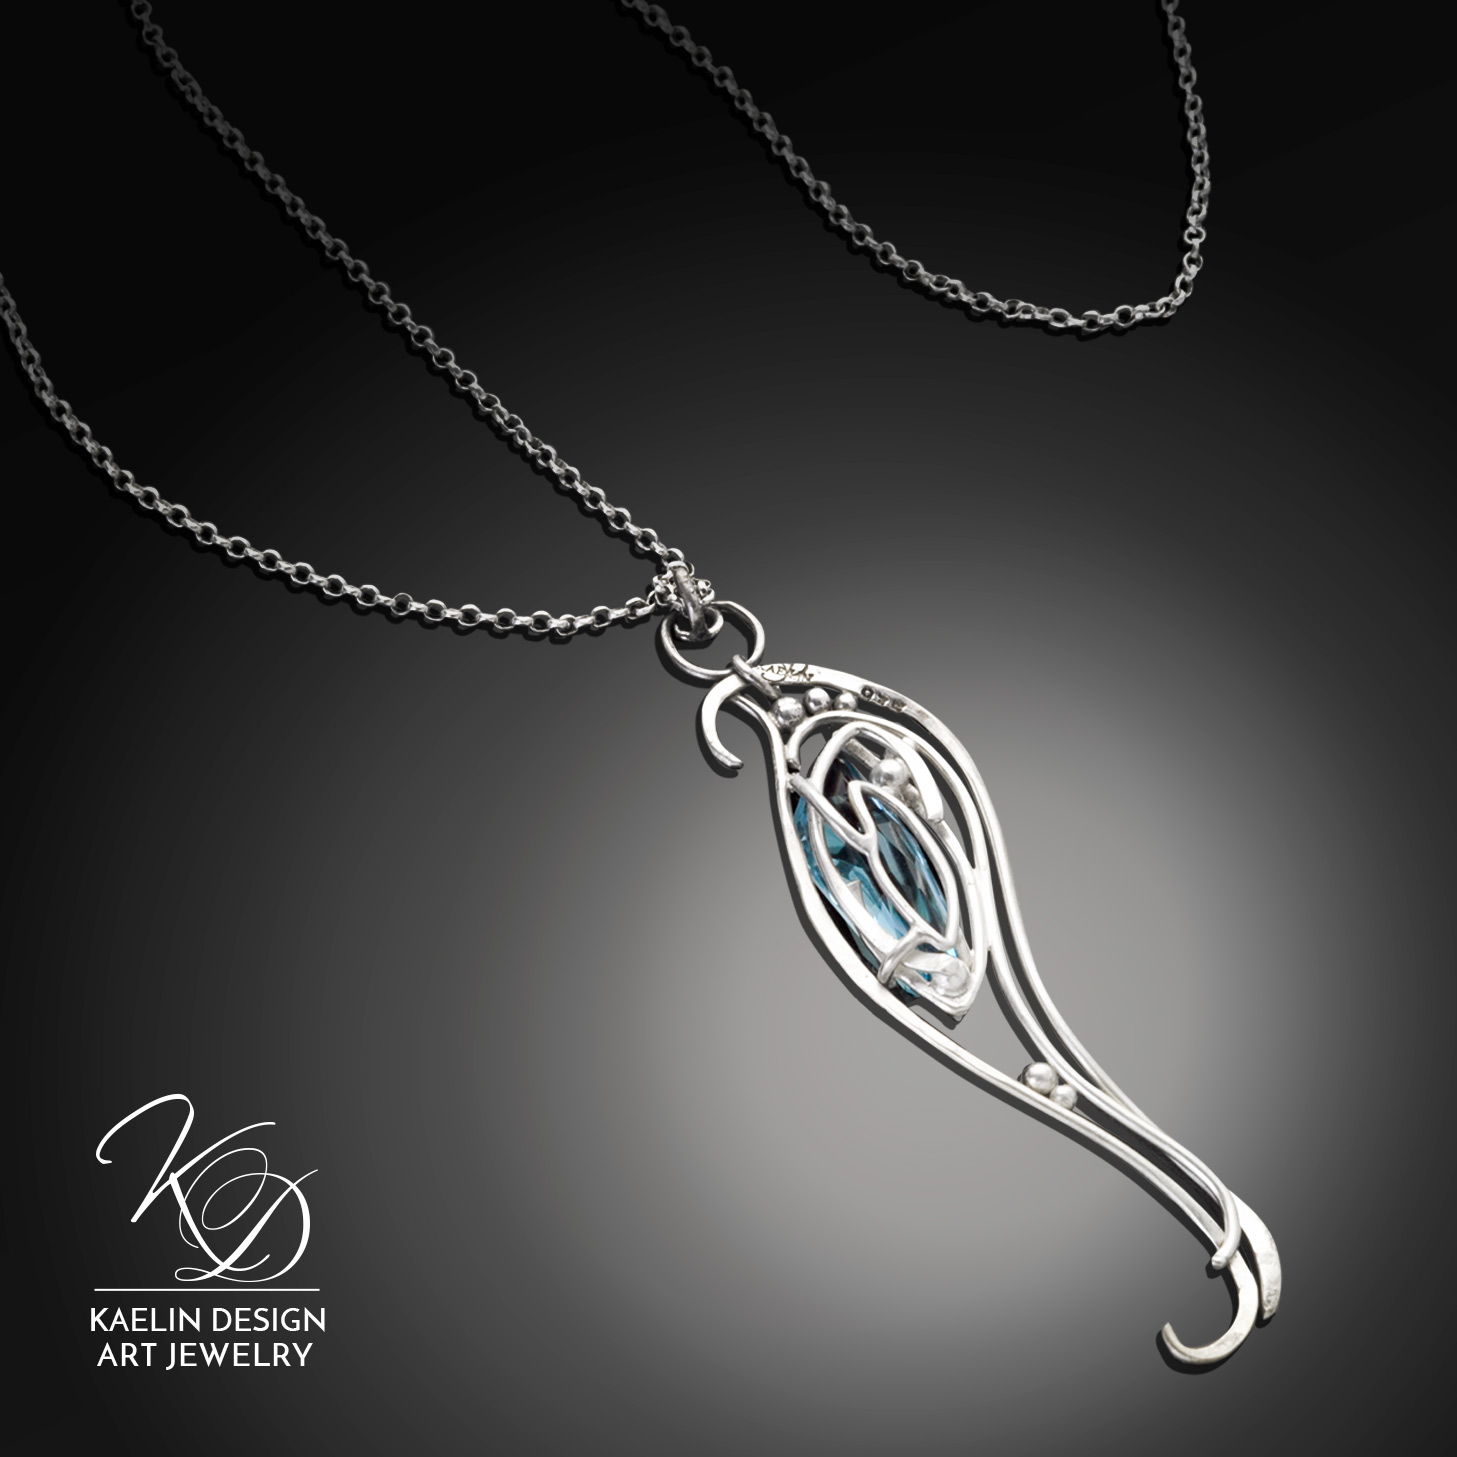 Upon the Waters Blue Topaz Fine Art Jewelry Silver Pendant by Kaelin Design